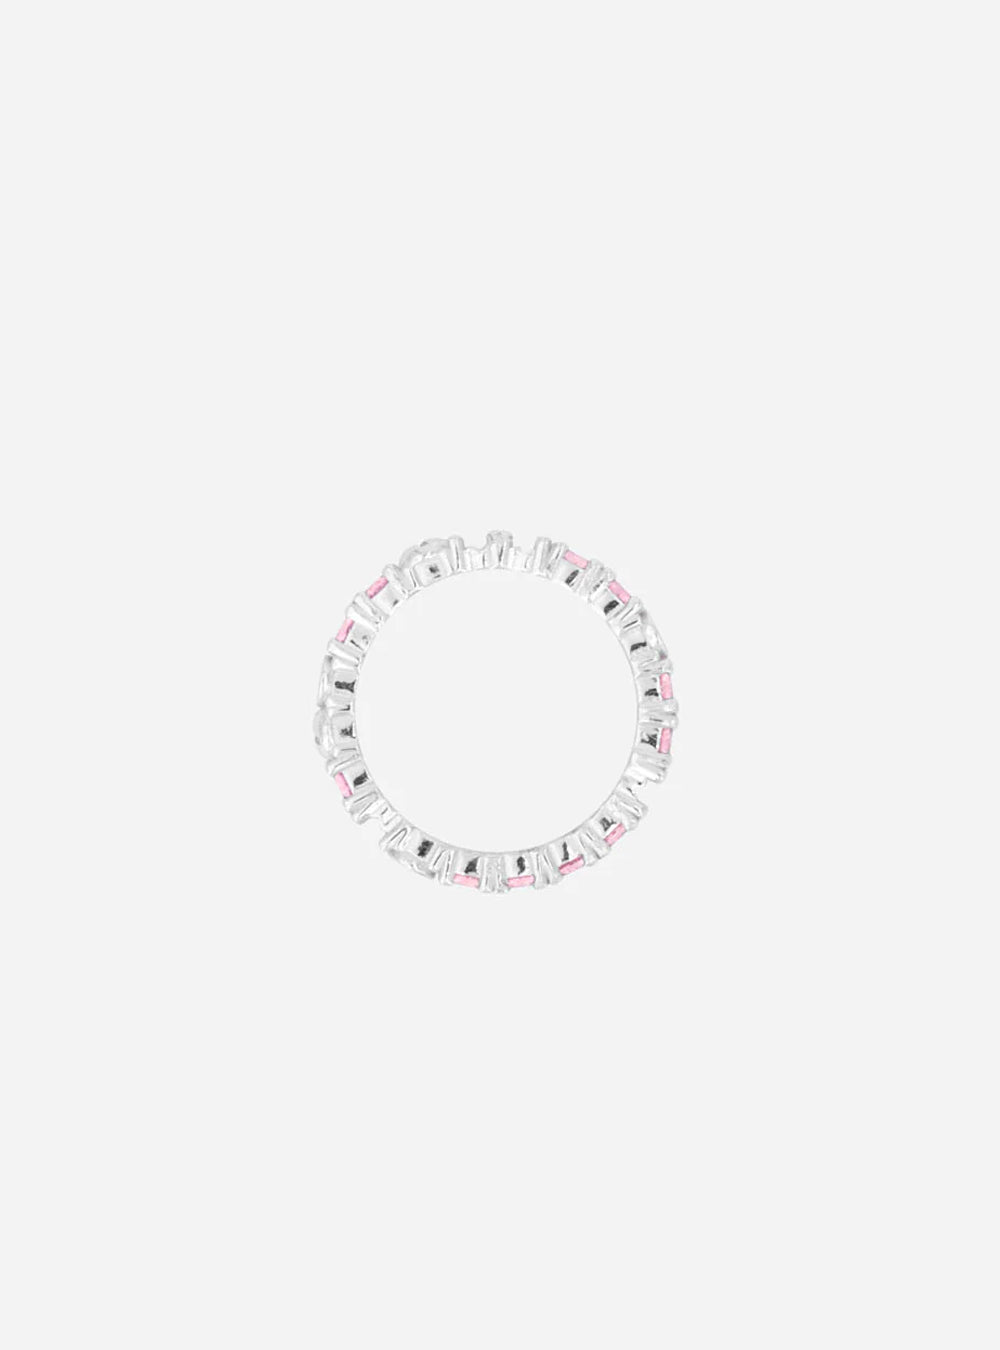 A Broken eternity ring with pink stones on a white background from MIDNIGHTFACTORY.